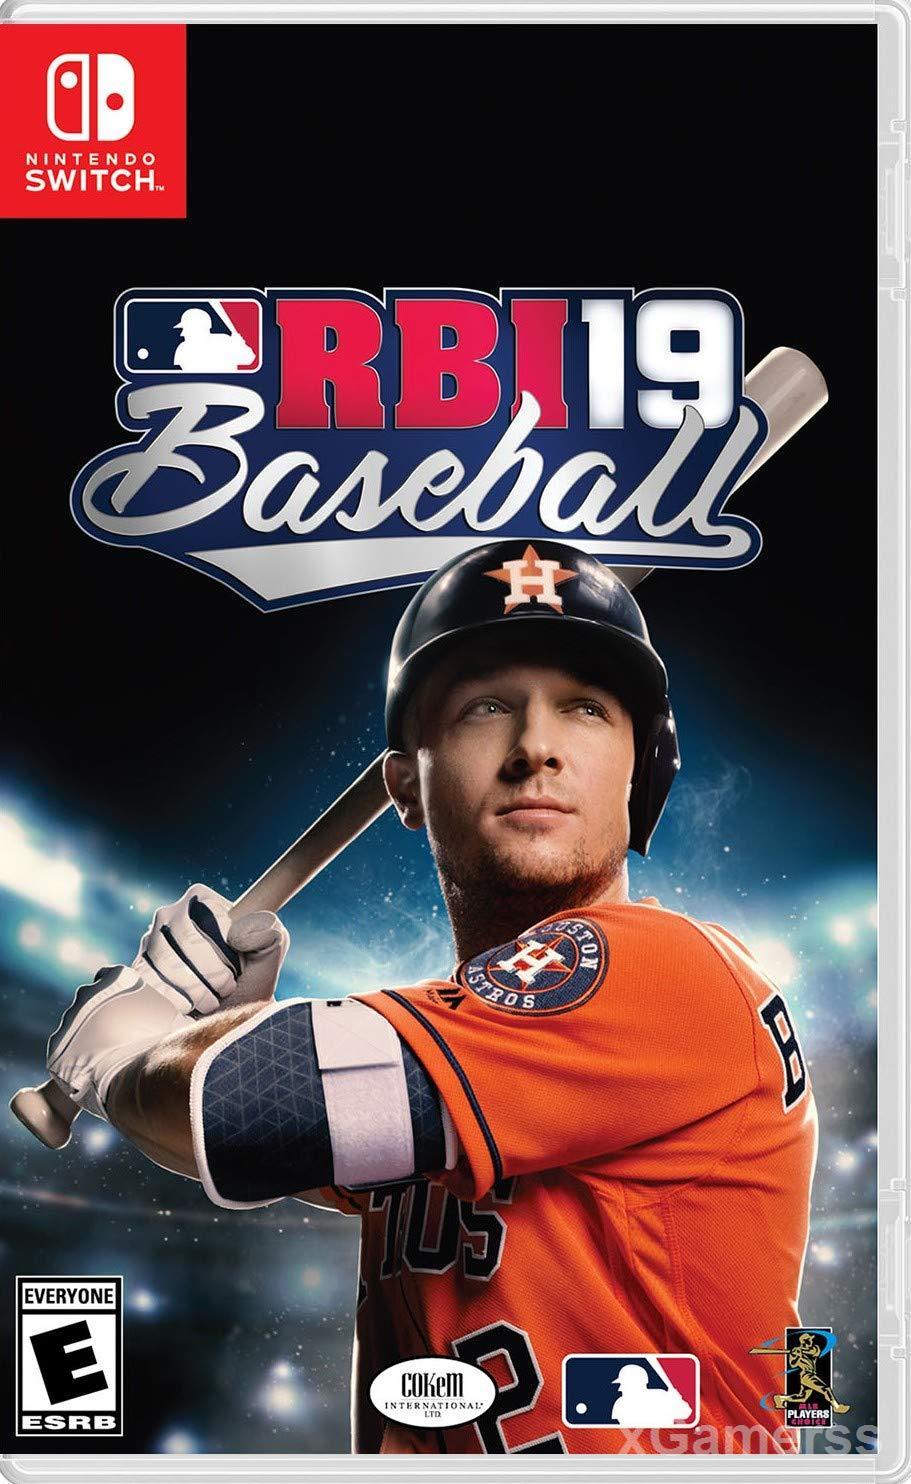 MLB The Show 19